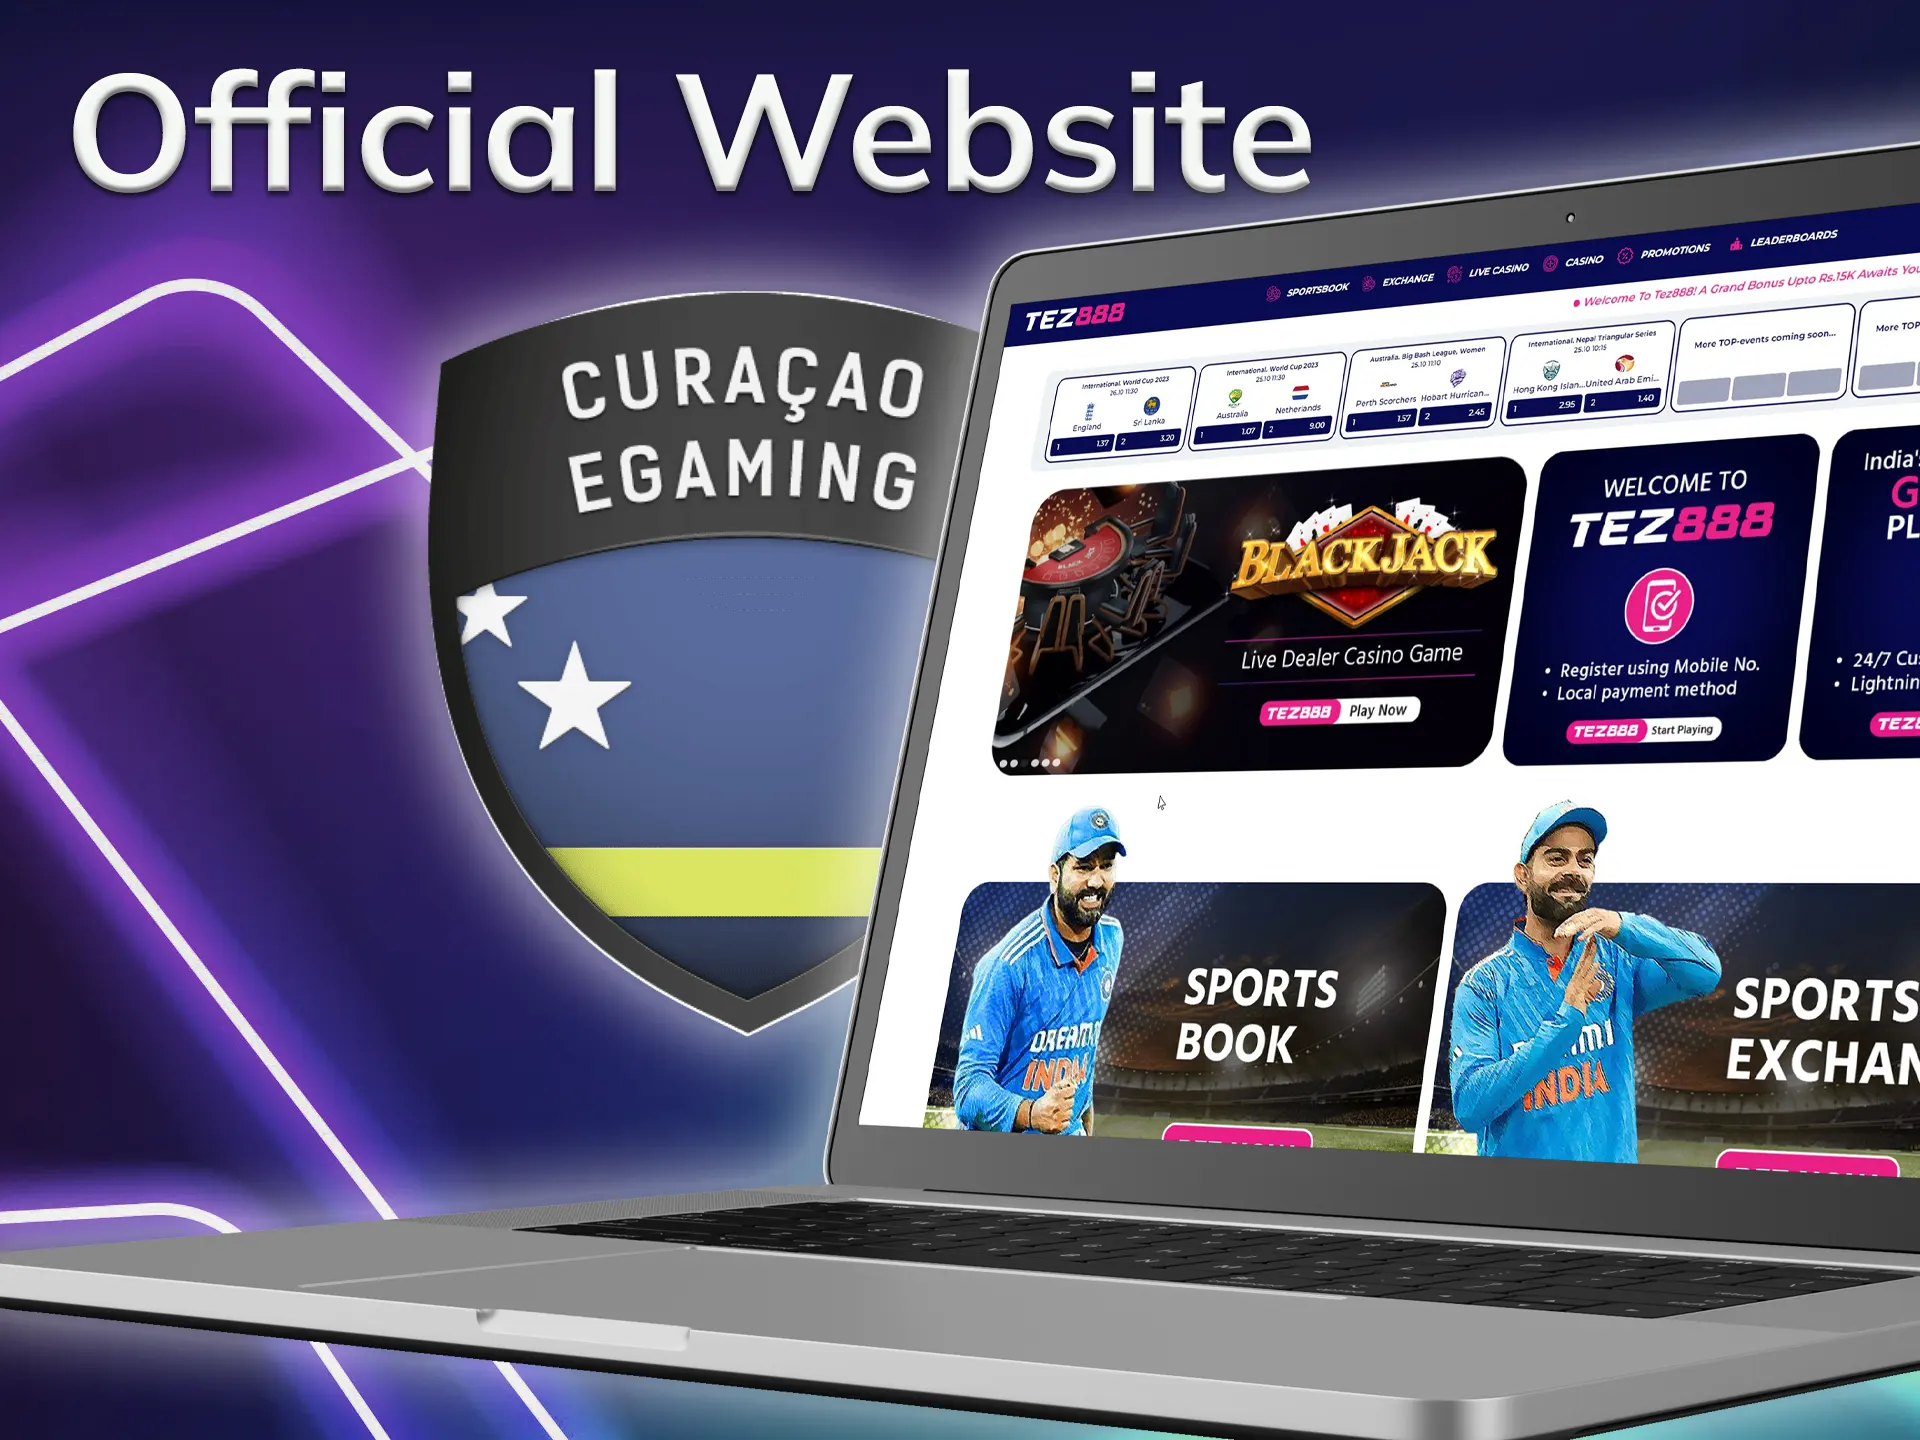 Tez888 complies with all the standards and regulations of an international betting platform.